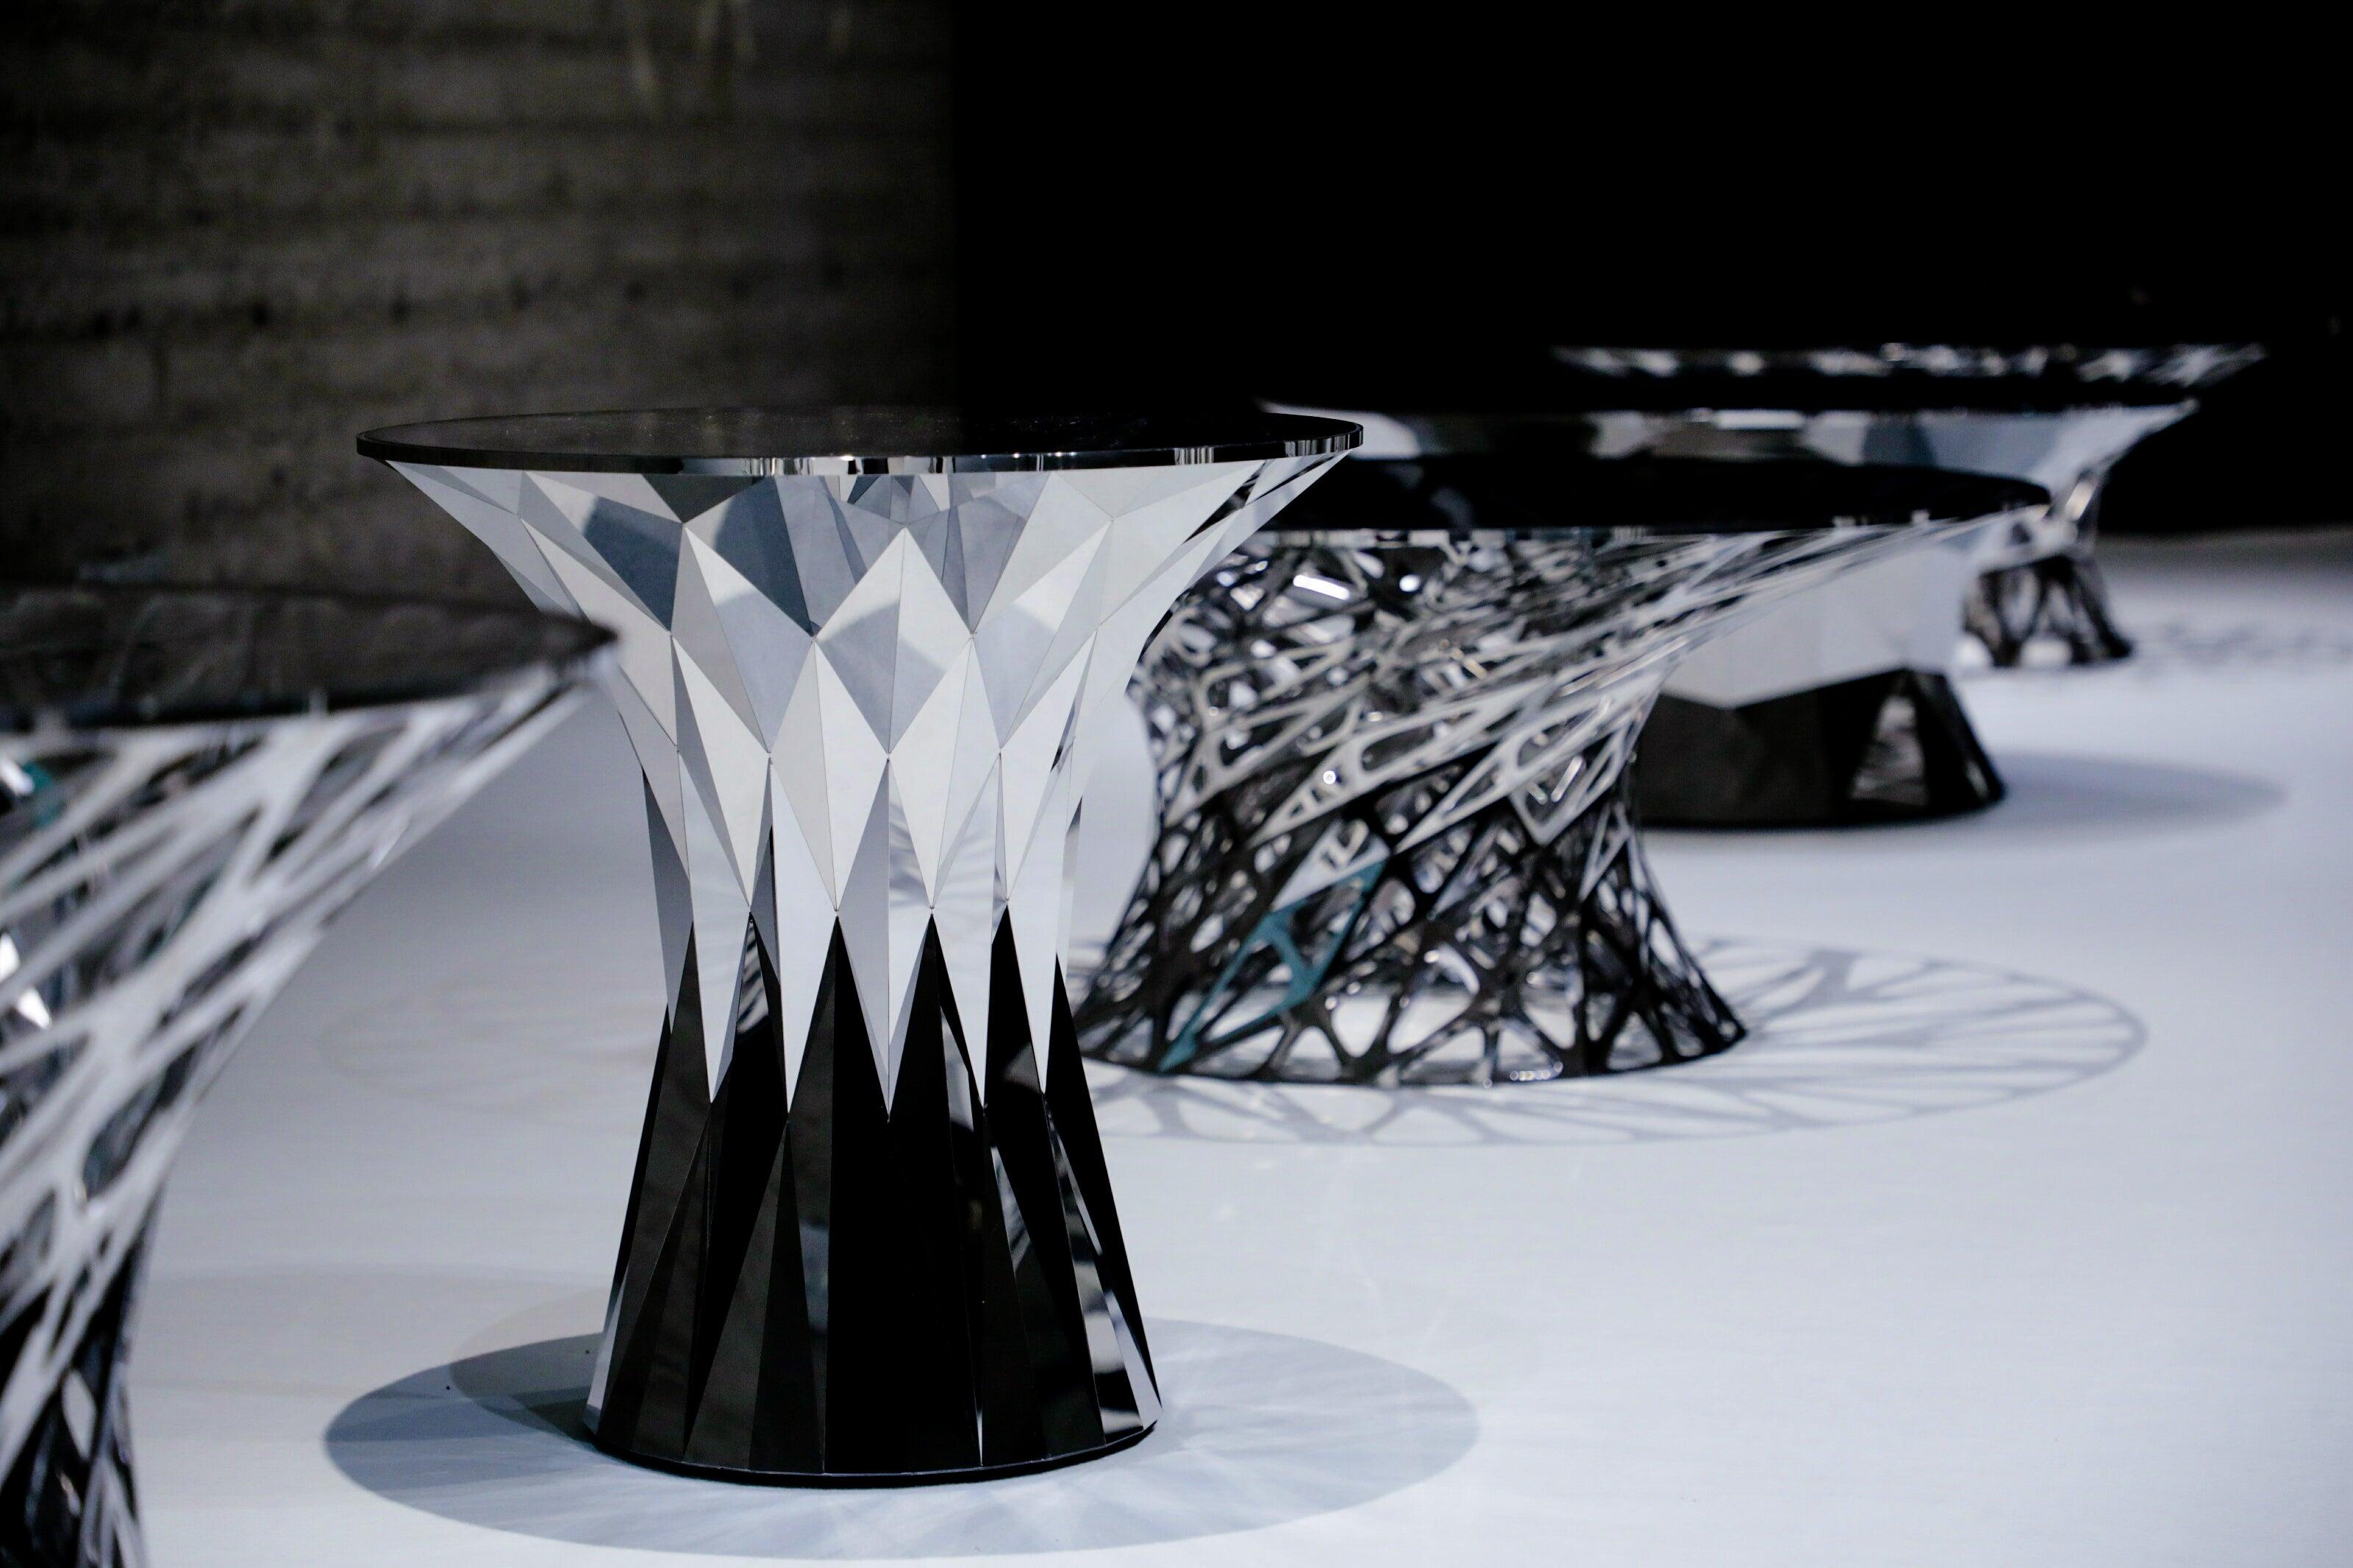 This elegantly designed table was created with handmade digital crafts, the same fabrication techniques devised in Zhoujie’s digital laboratory. The work's digital roots lend an architectural and minimal aesthetic not commonly found at this